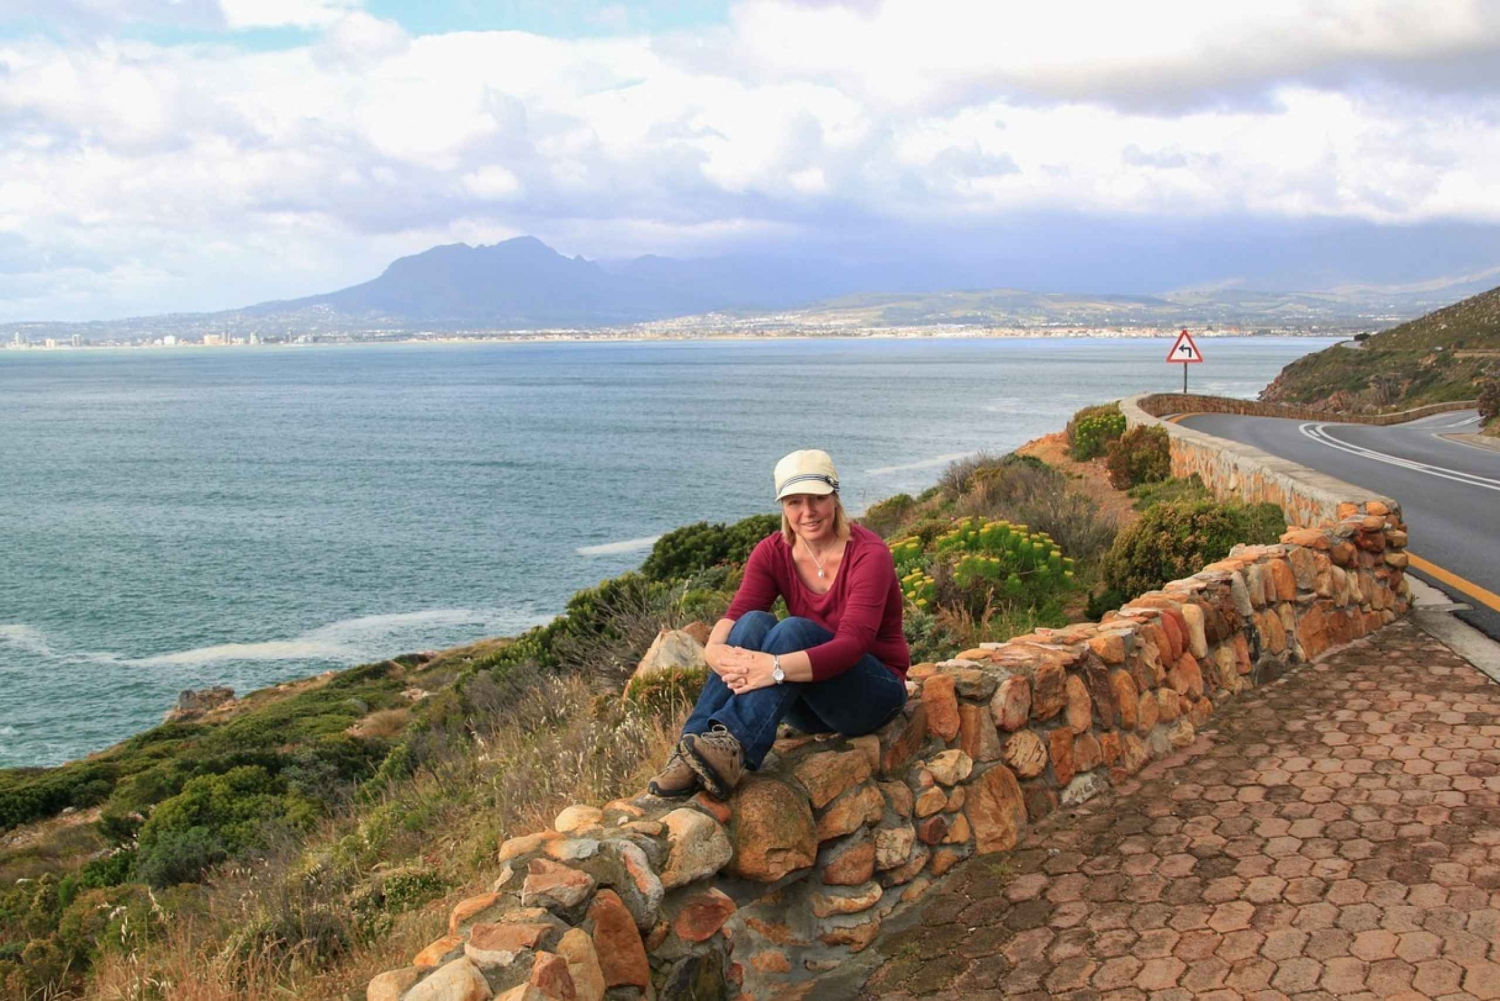 Cape Town: The Cape Point Instagram Small Group Tour